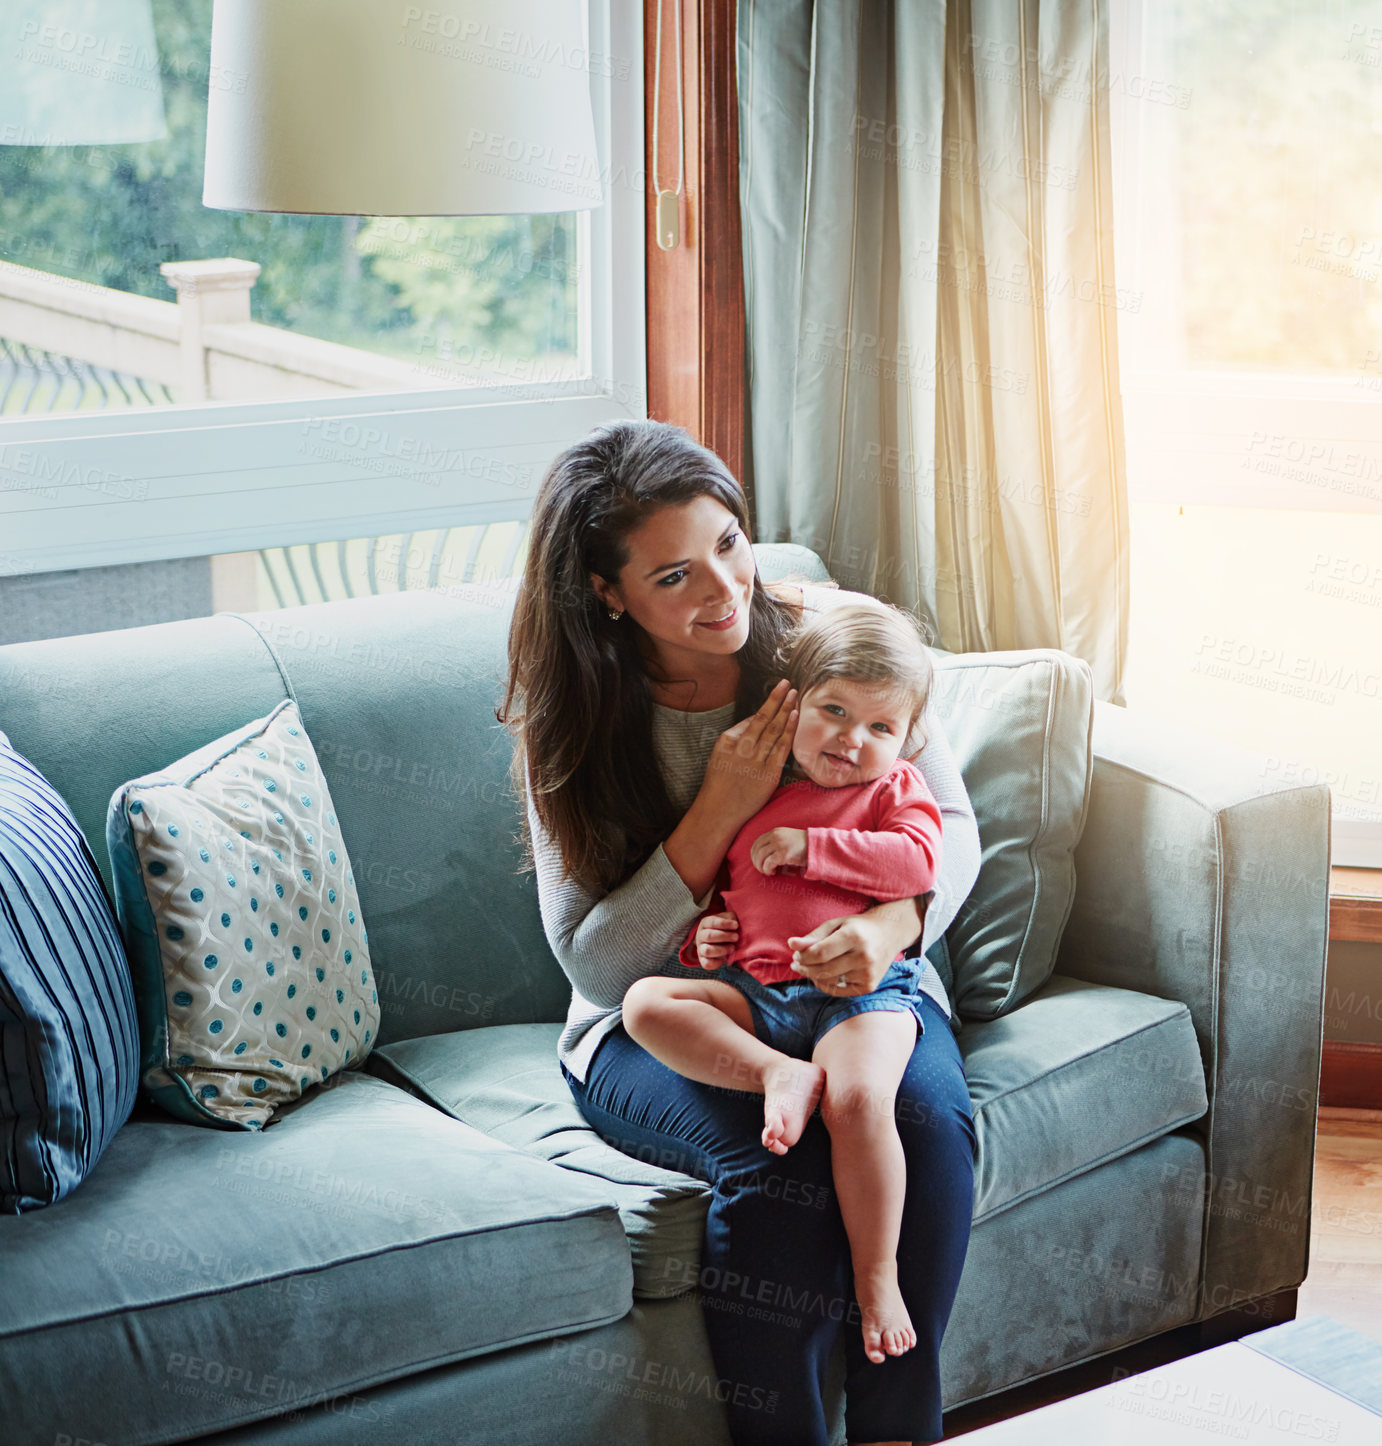 Buy stock photo Relax, happy and smile with mother and baby on sofa for bonding, quality time and child development. Growth, support and trust with mom and daughter in family home for health, connection and care